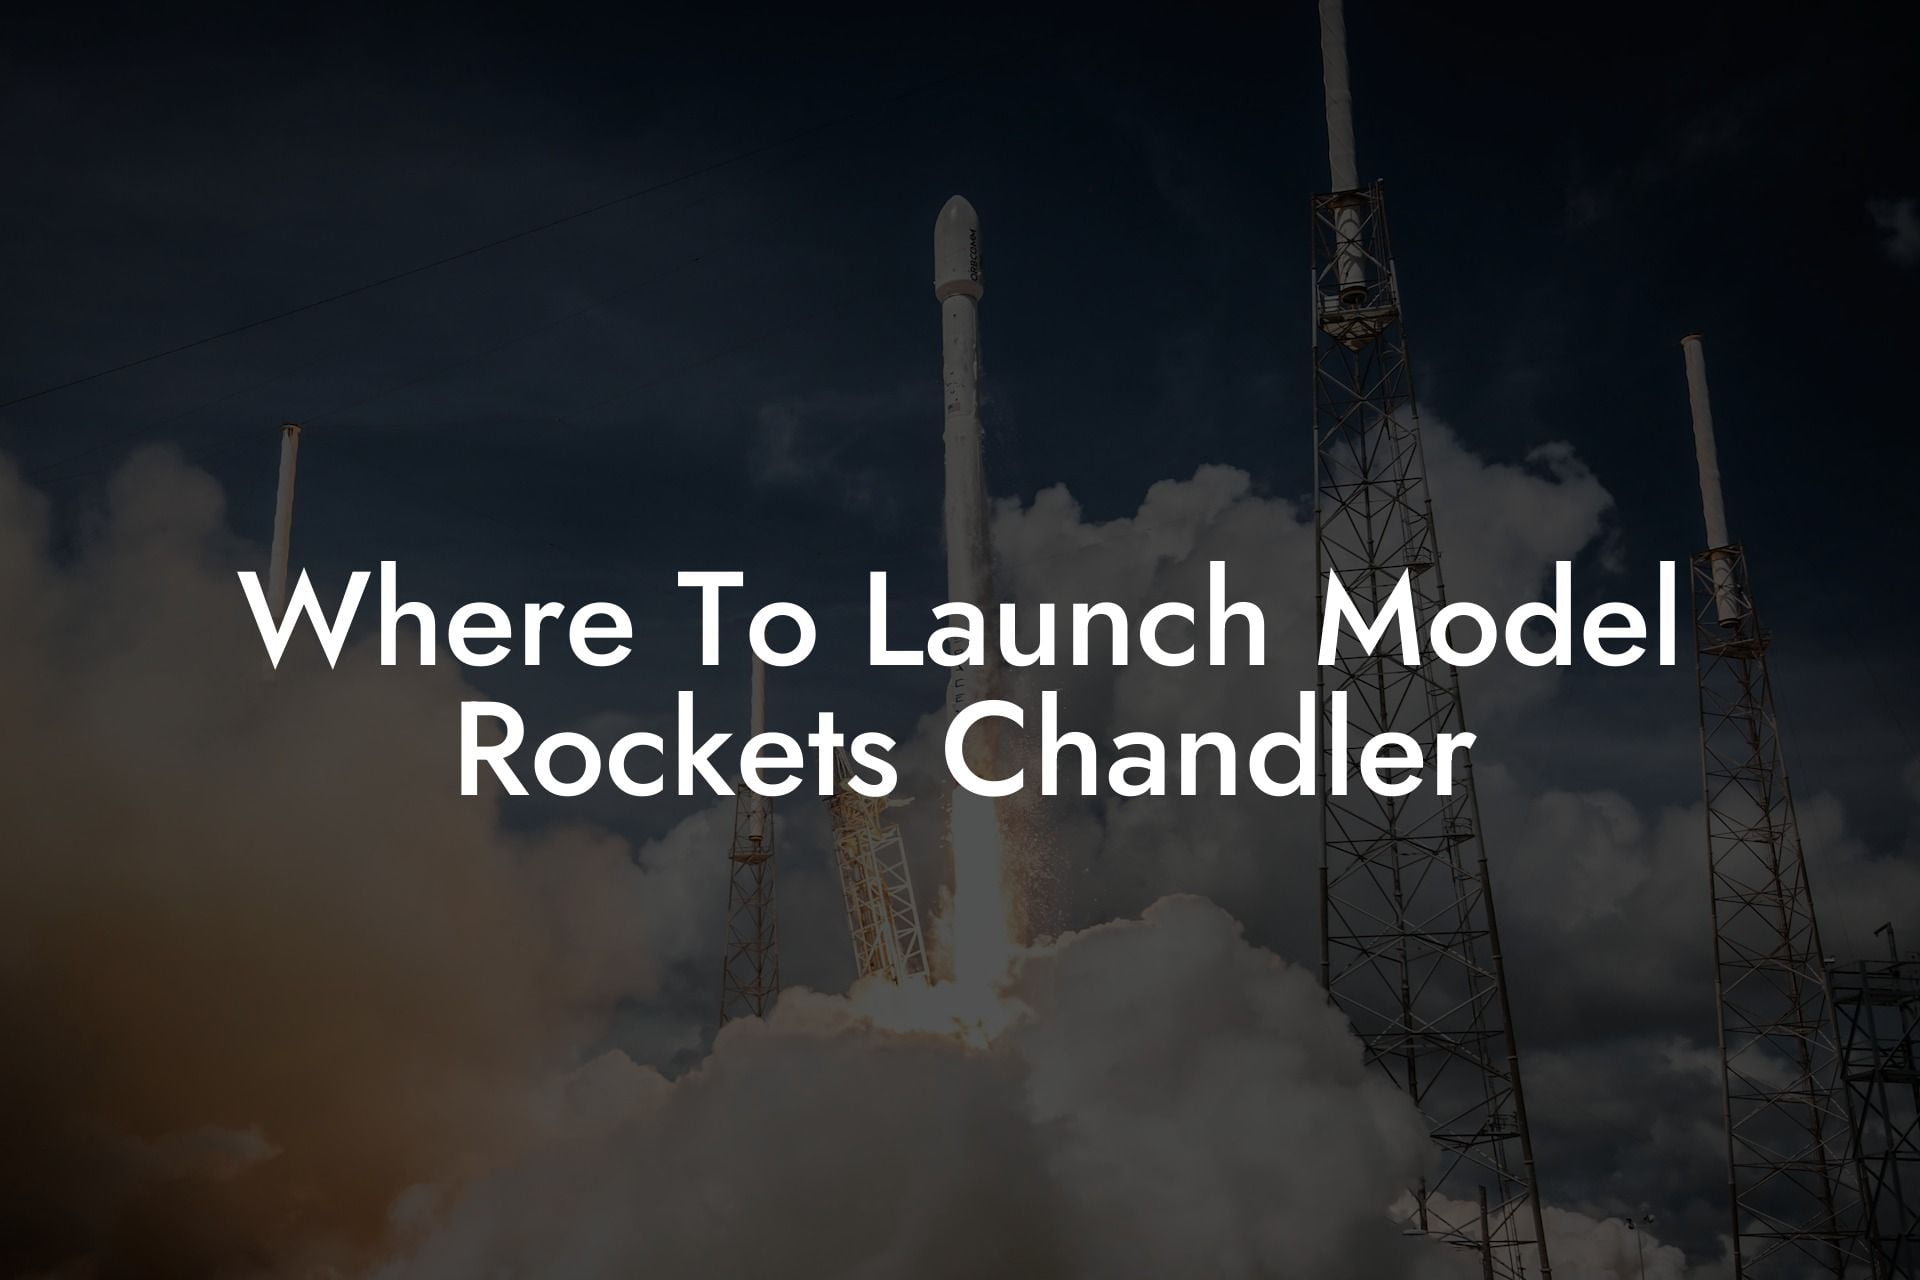 Where To Launch Model Rockets Chandler